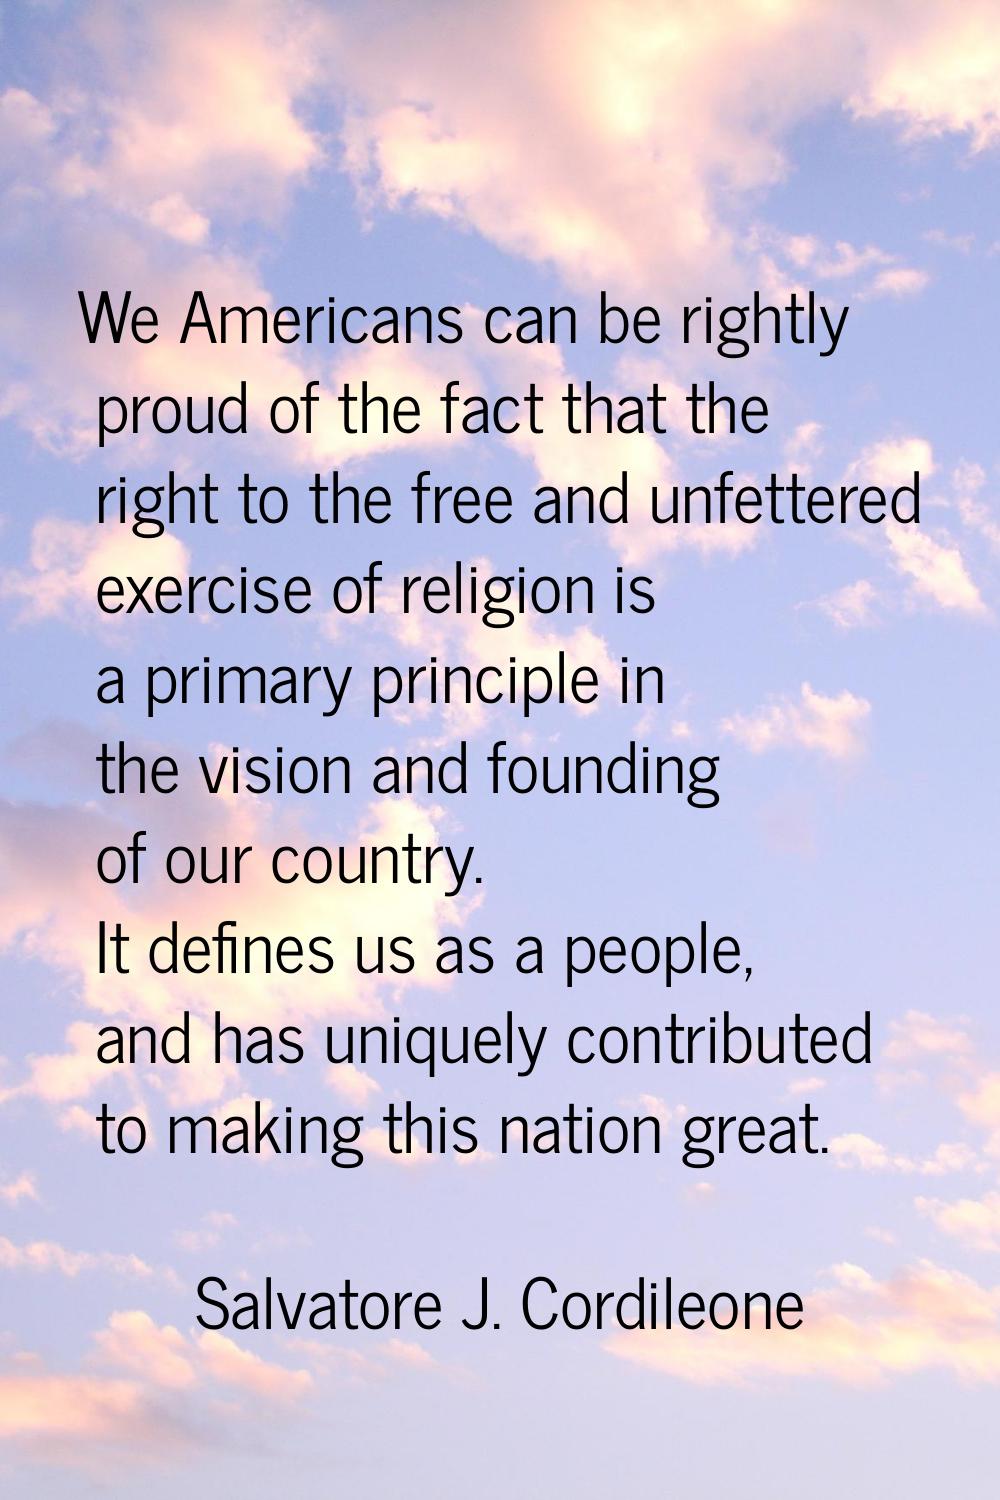 We Americans can be rightly proud of the fact that the right to the free and unfettered exercise of